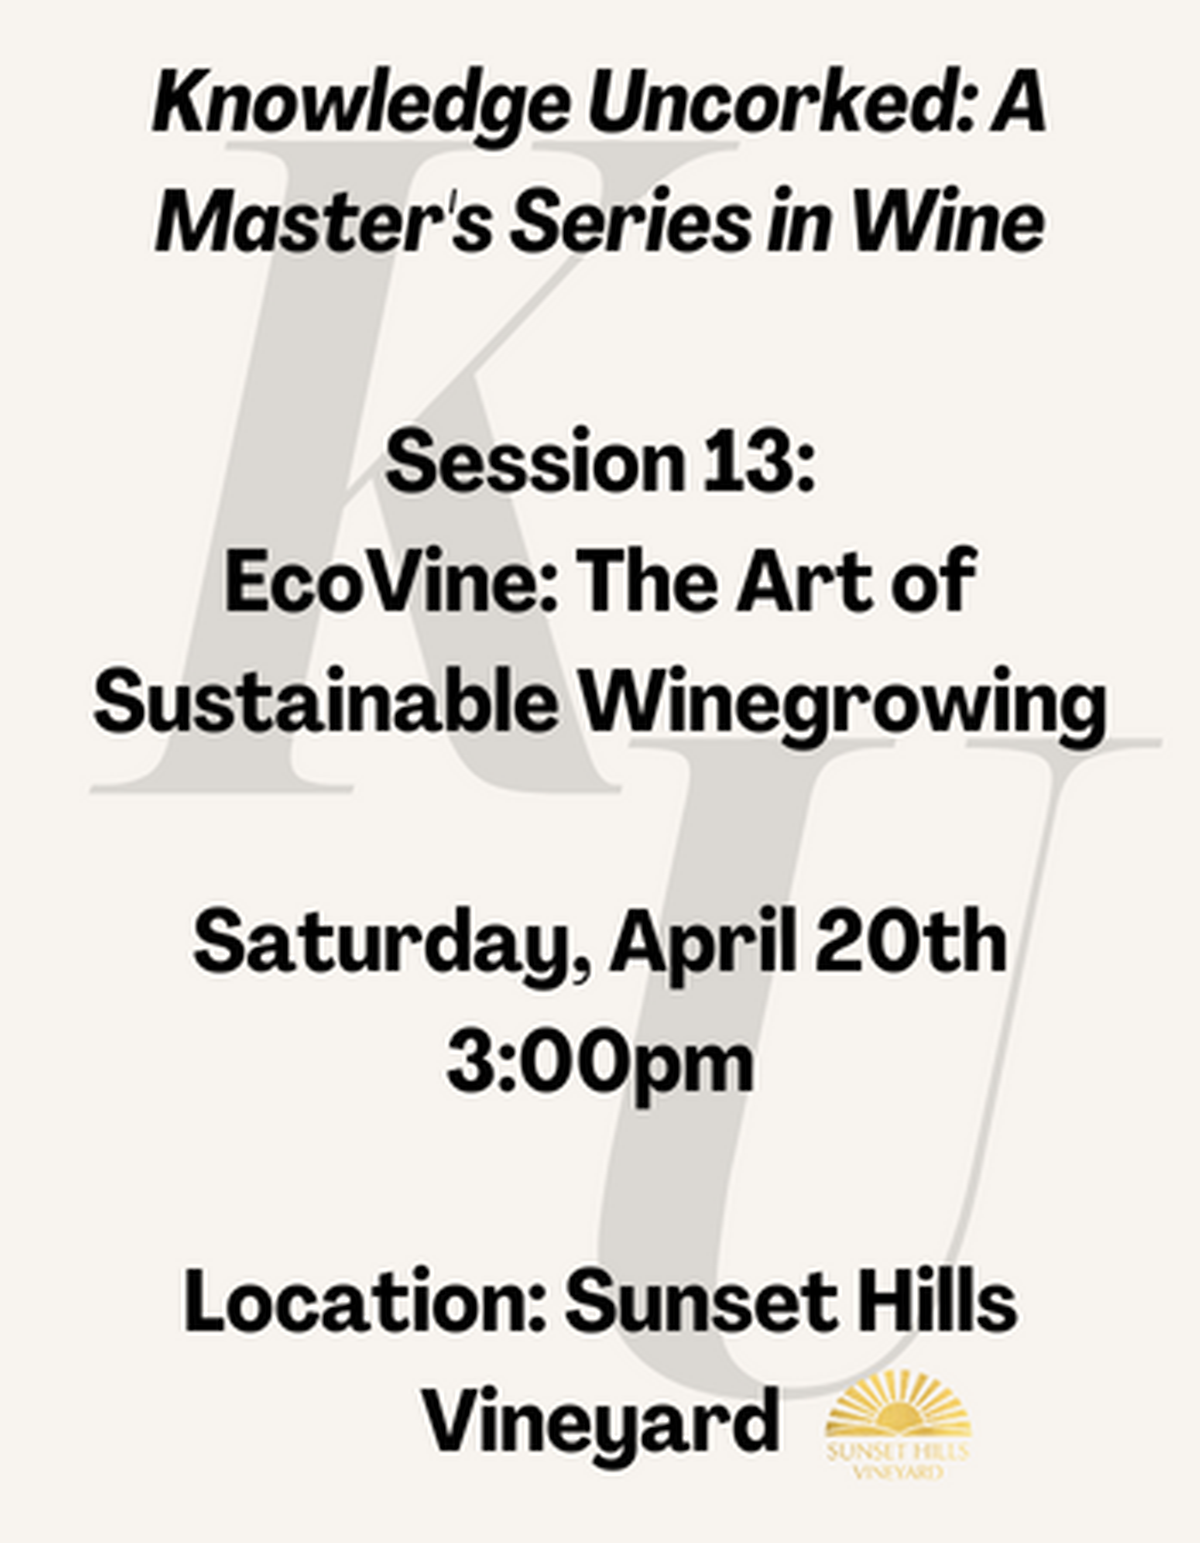 EcoVine: The Art of Sustainable Winegrowing (3:00pm)